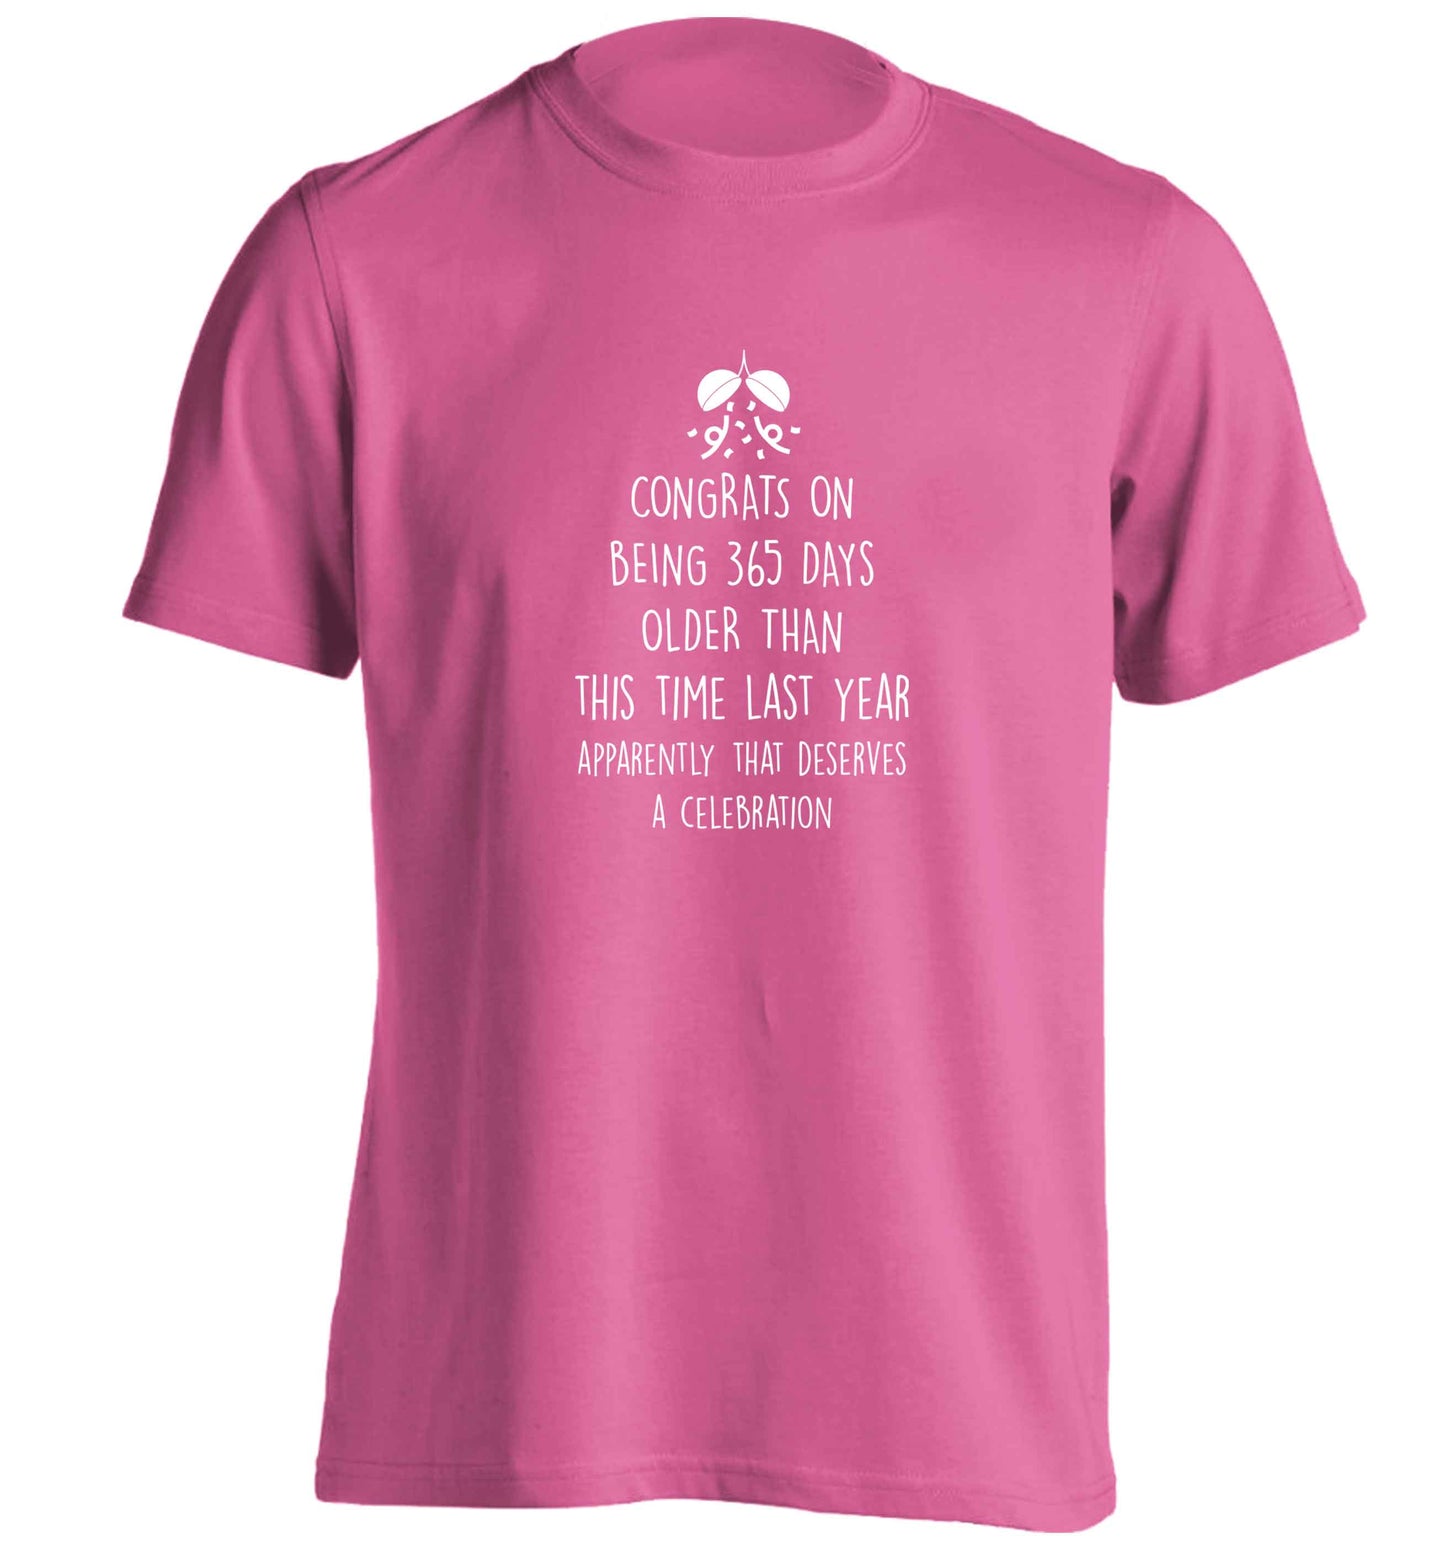 Congrats on being 365 days older than you were this time last year apparently that deserves a celebration adults unisex pink Tshirt 2XL